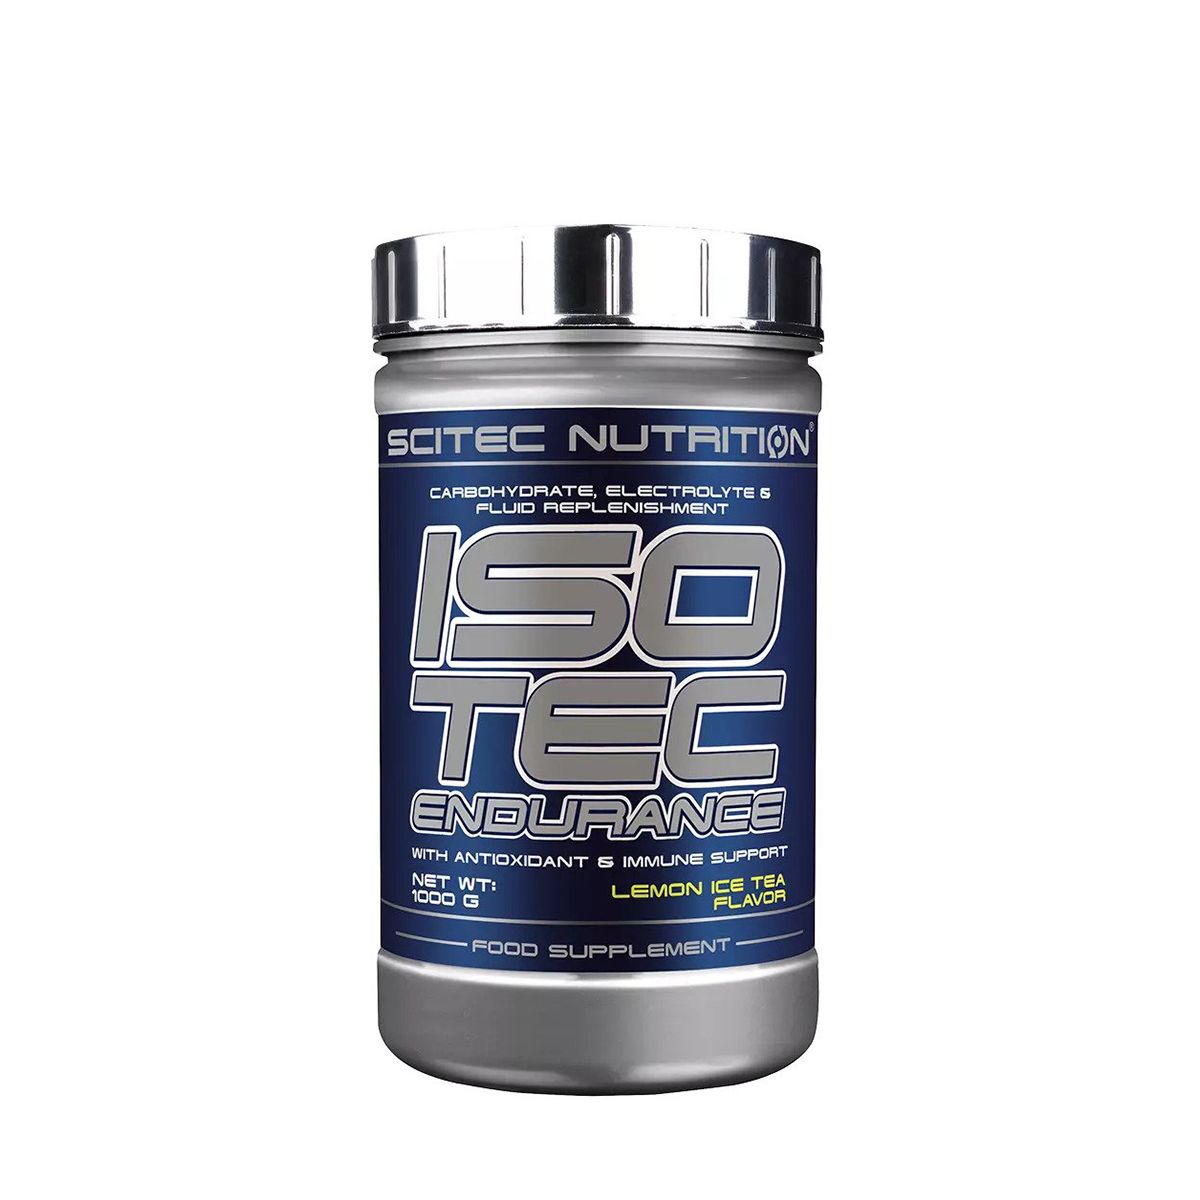 SCITEC NUTRITION - ISOTEC - CARBOHYDRATE & FLUID REPLENISHMENT FORMULA - 1000 G 